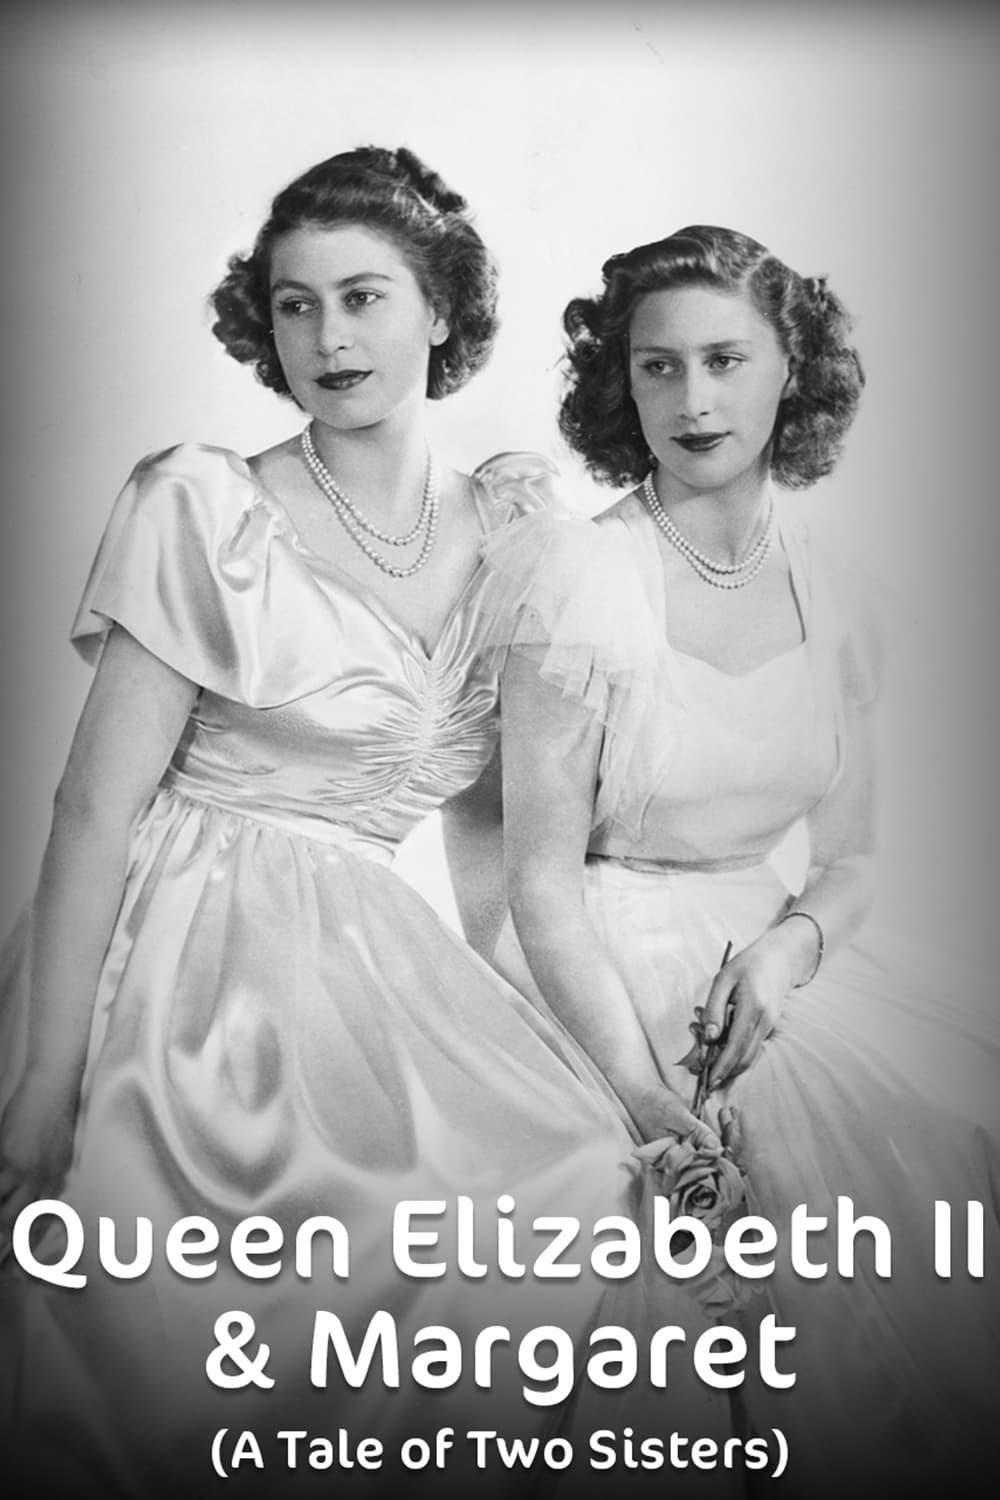 Elizabeth & Margaret: A Tale of Two Sisters poster